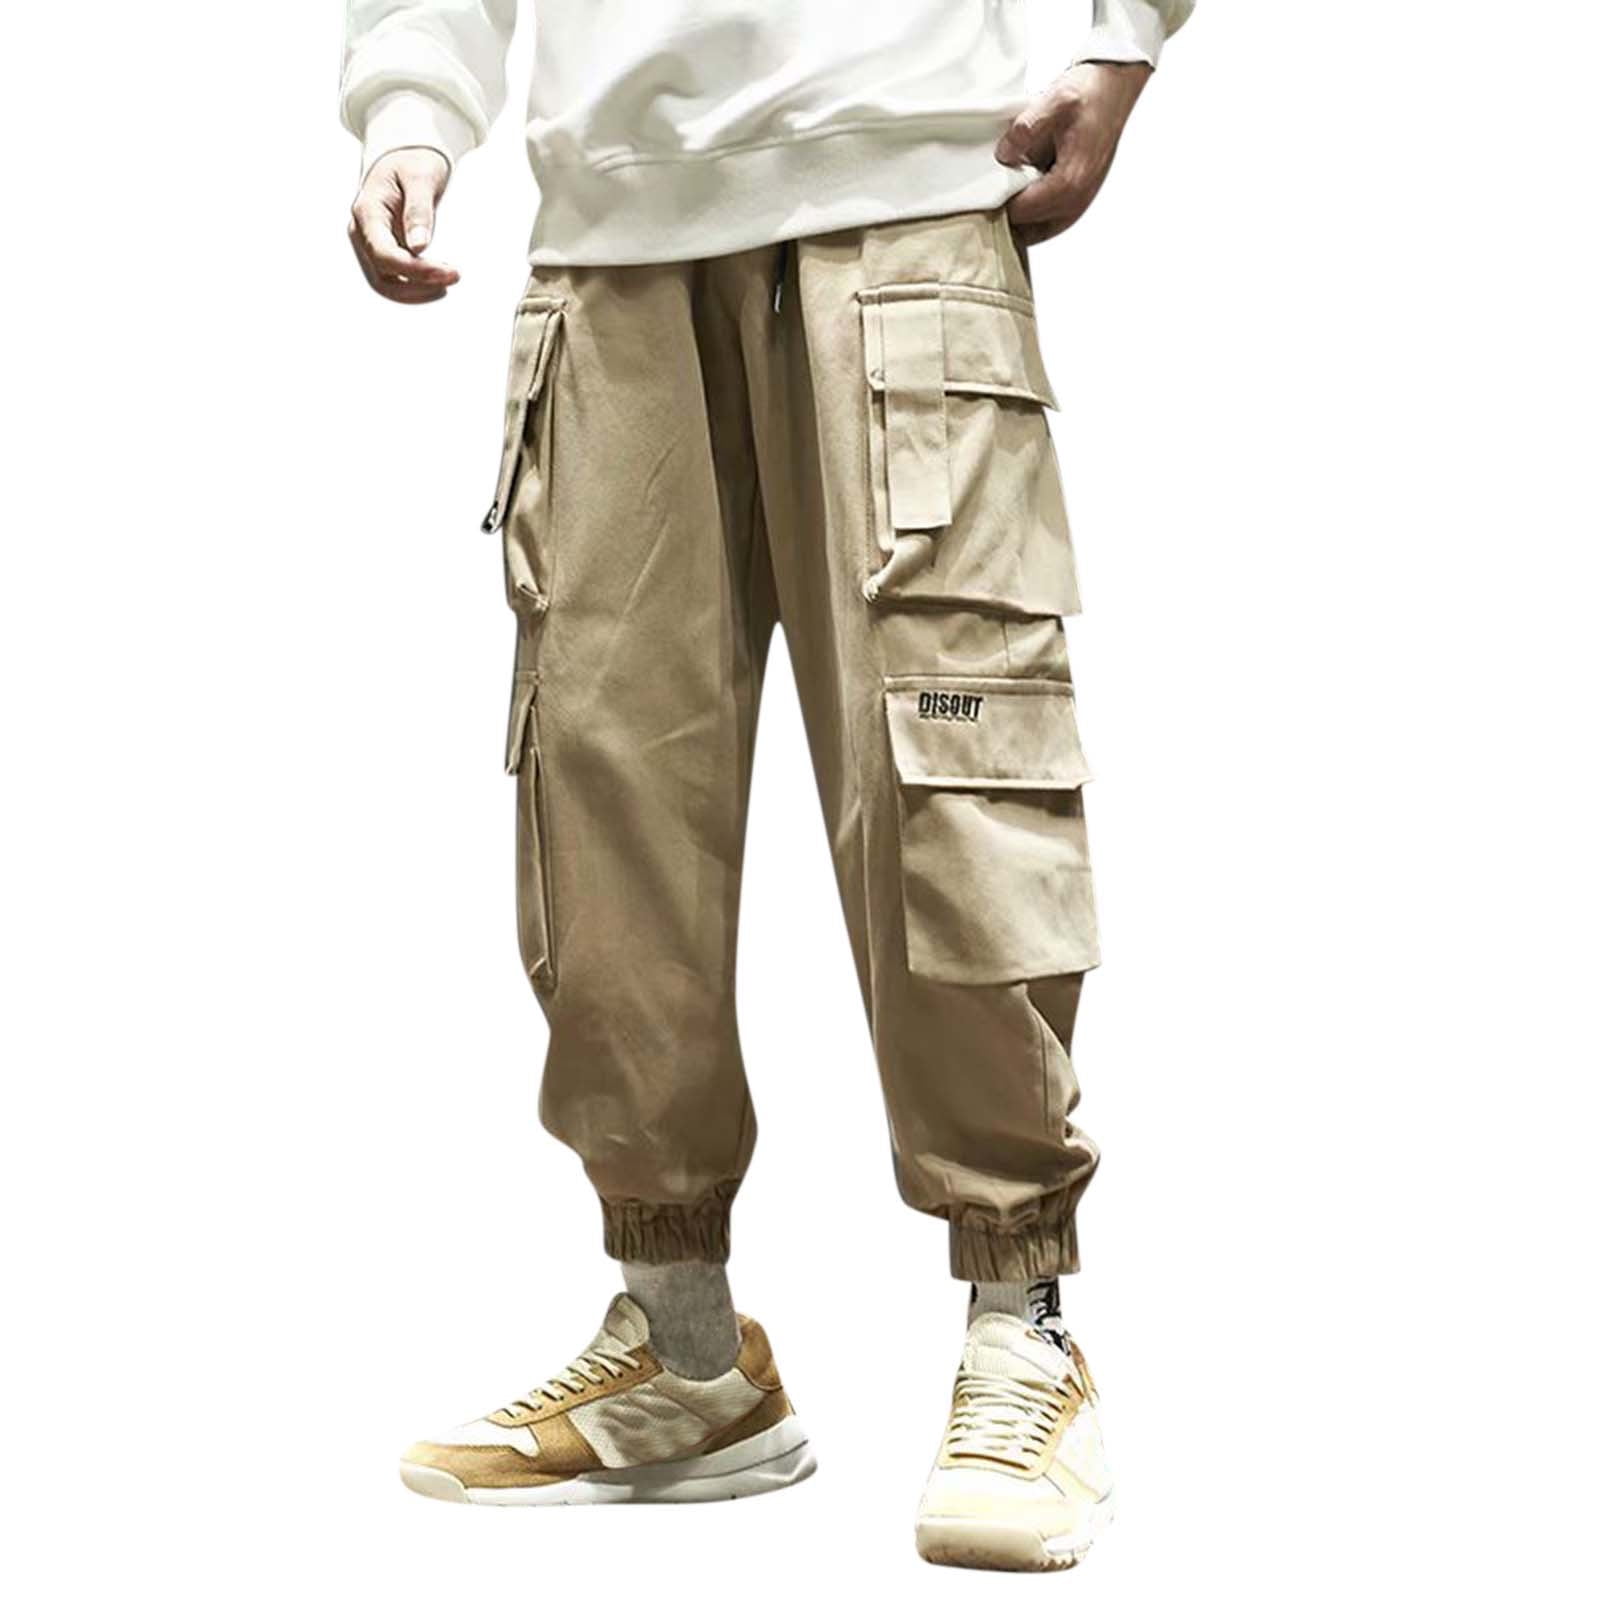 Parachute pants  Summer outfits men, Stylish mens outfits, Streetwear men  outfits